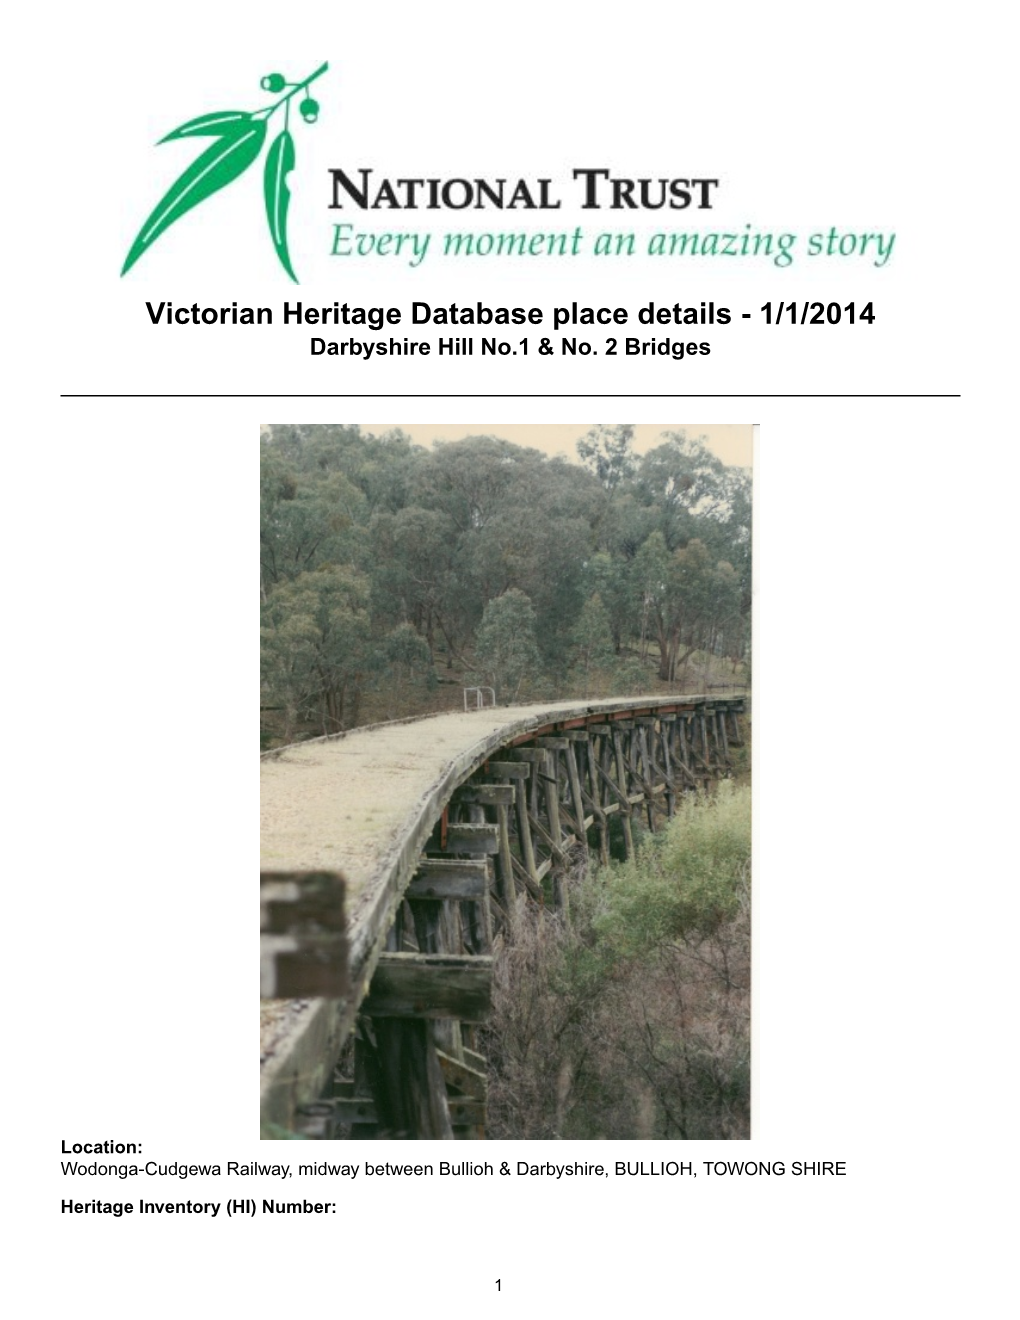 Victorian Heritage Database Place Details - 1/1/2014 Darbyshire Hill No.1 & No